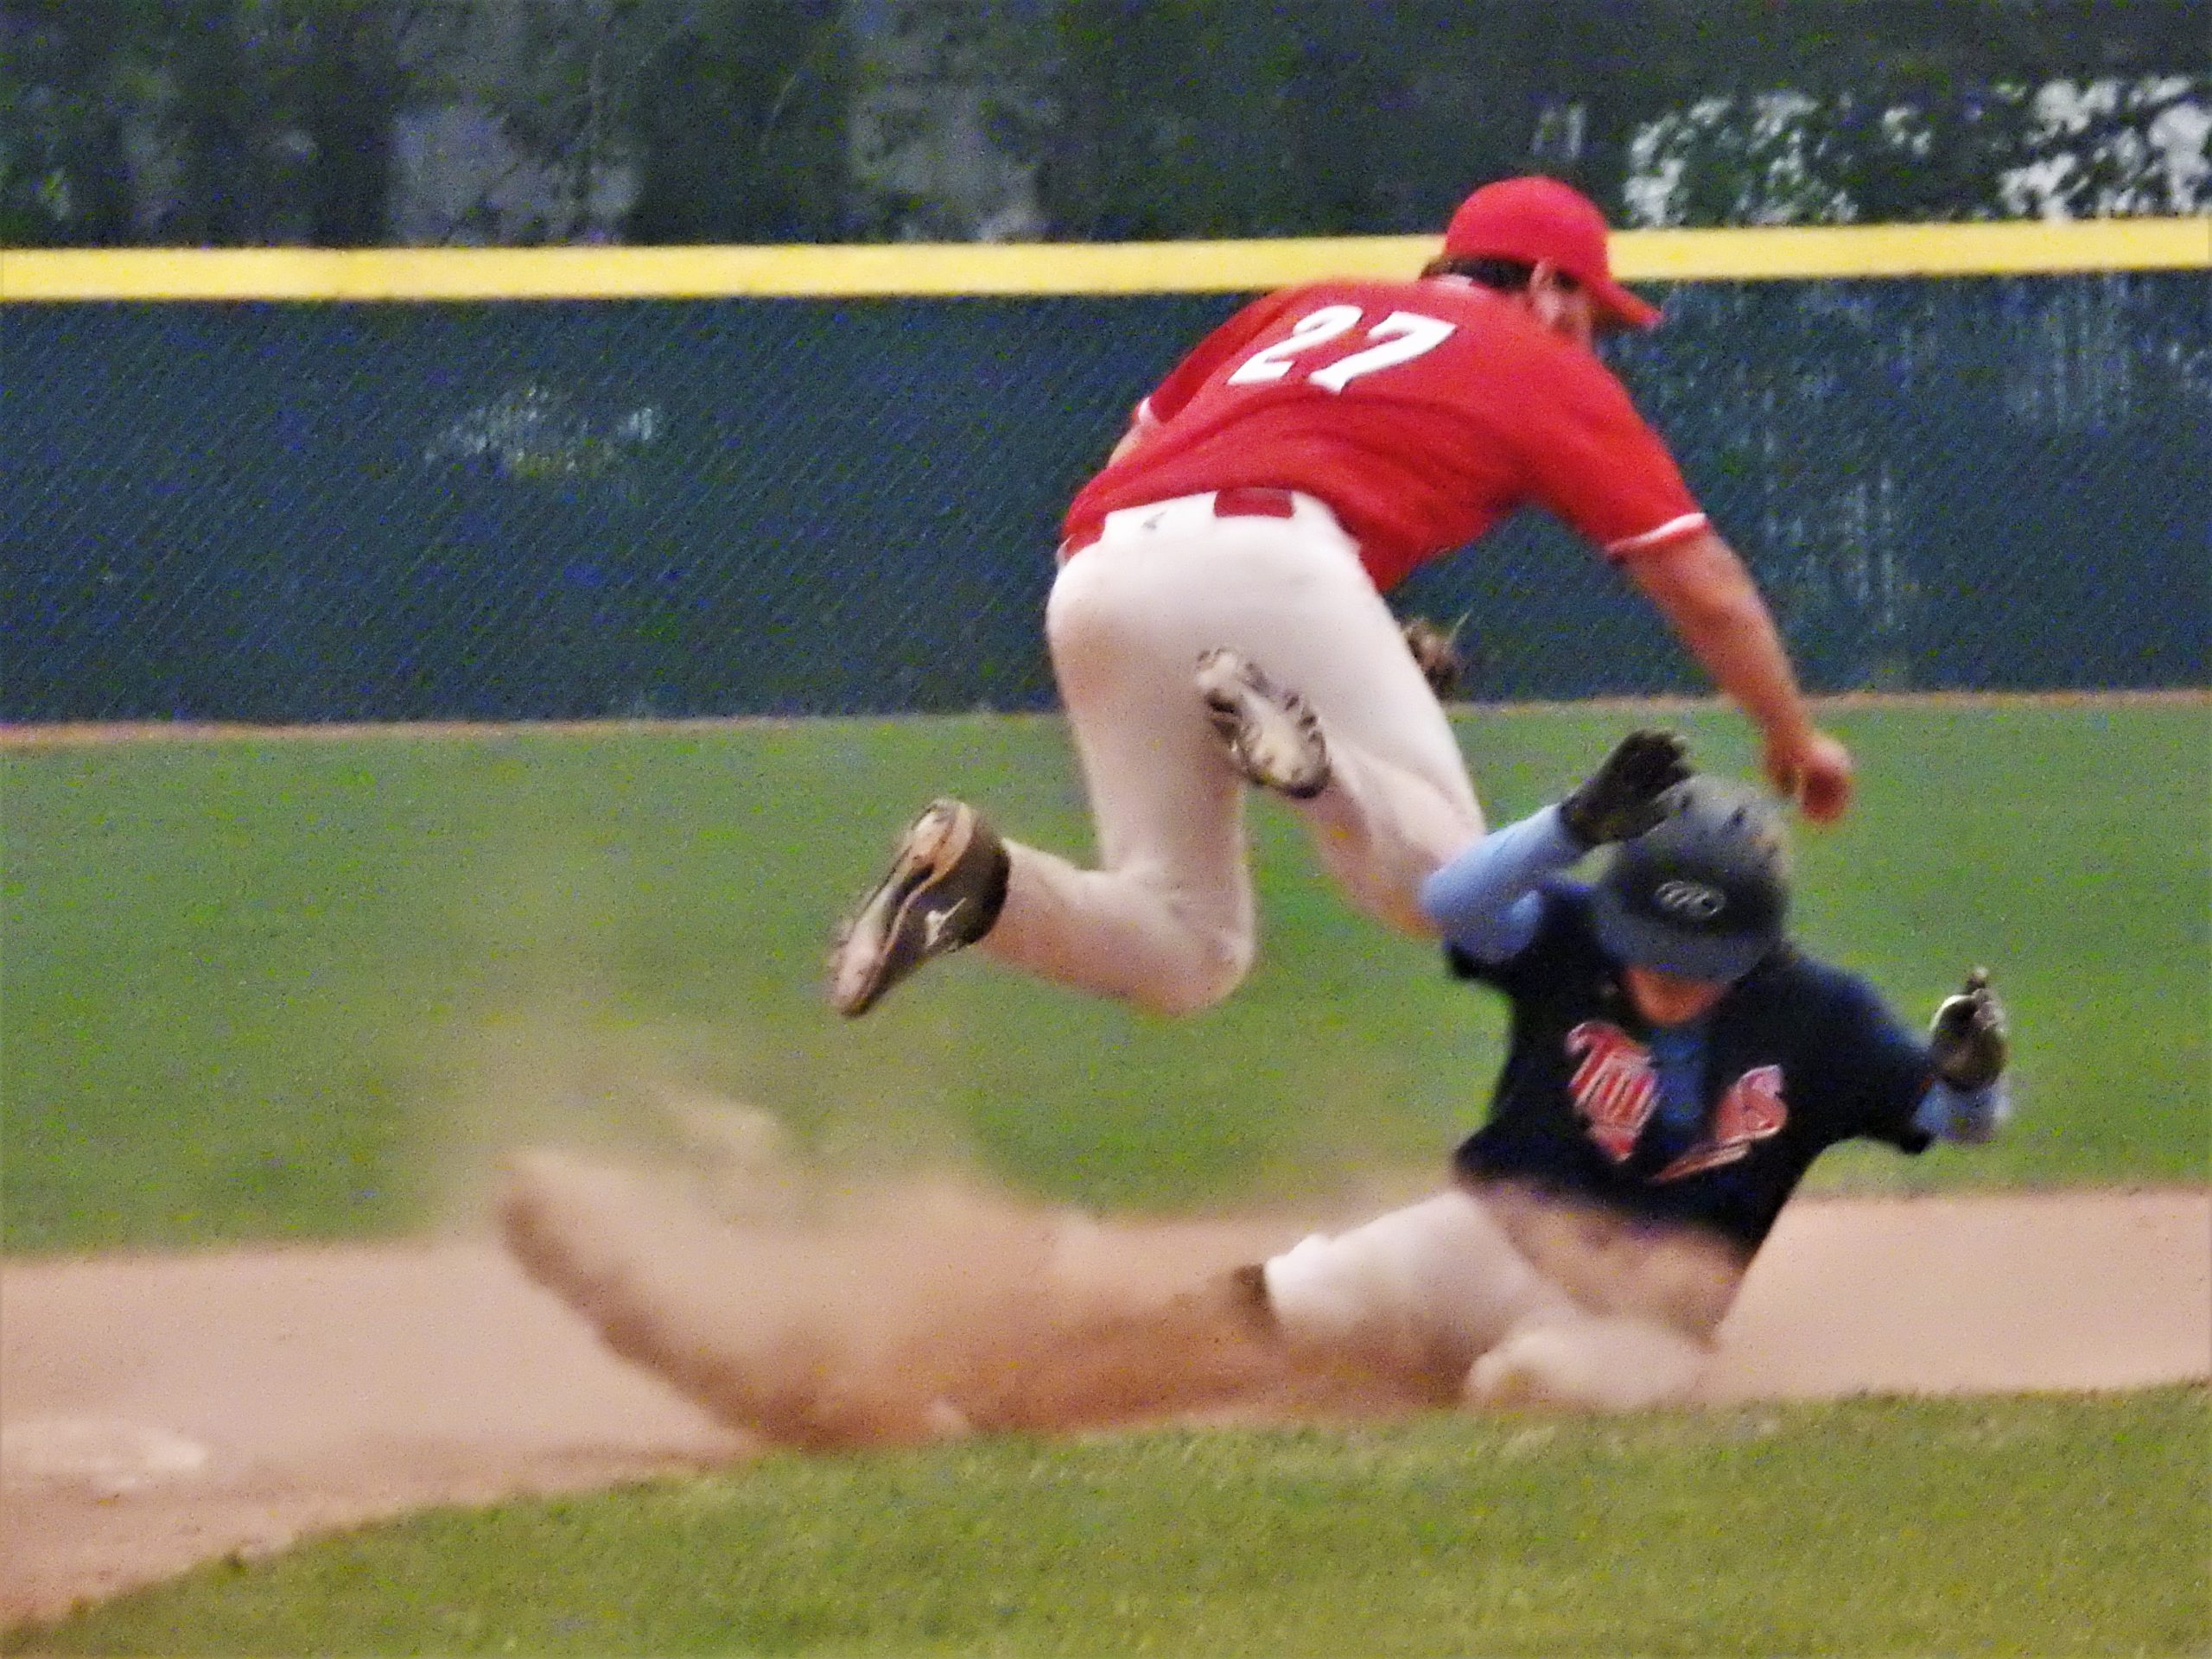 Breakin-up-the-double-play-1